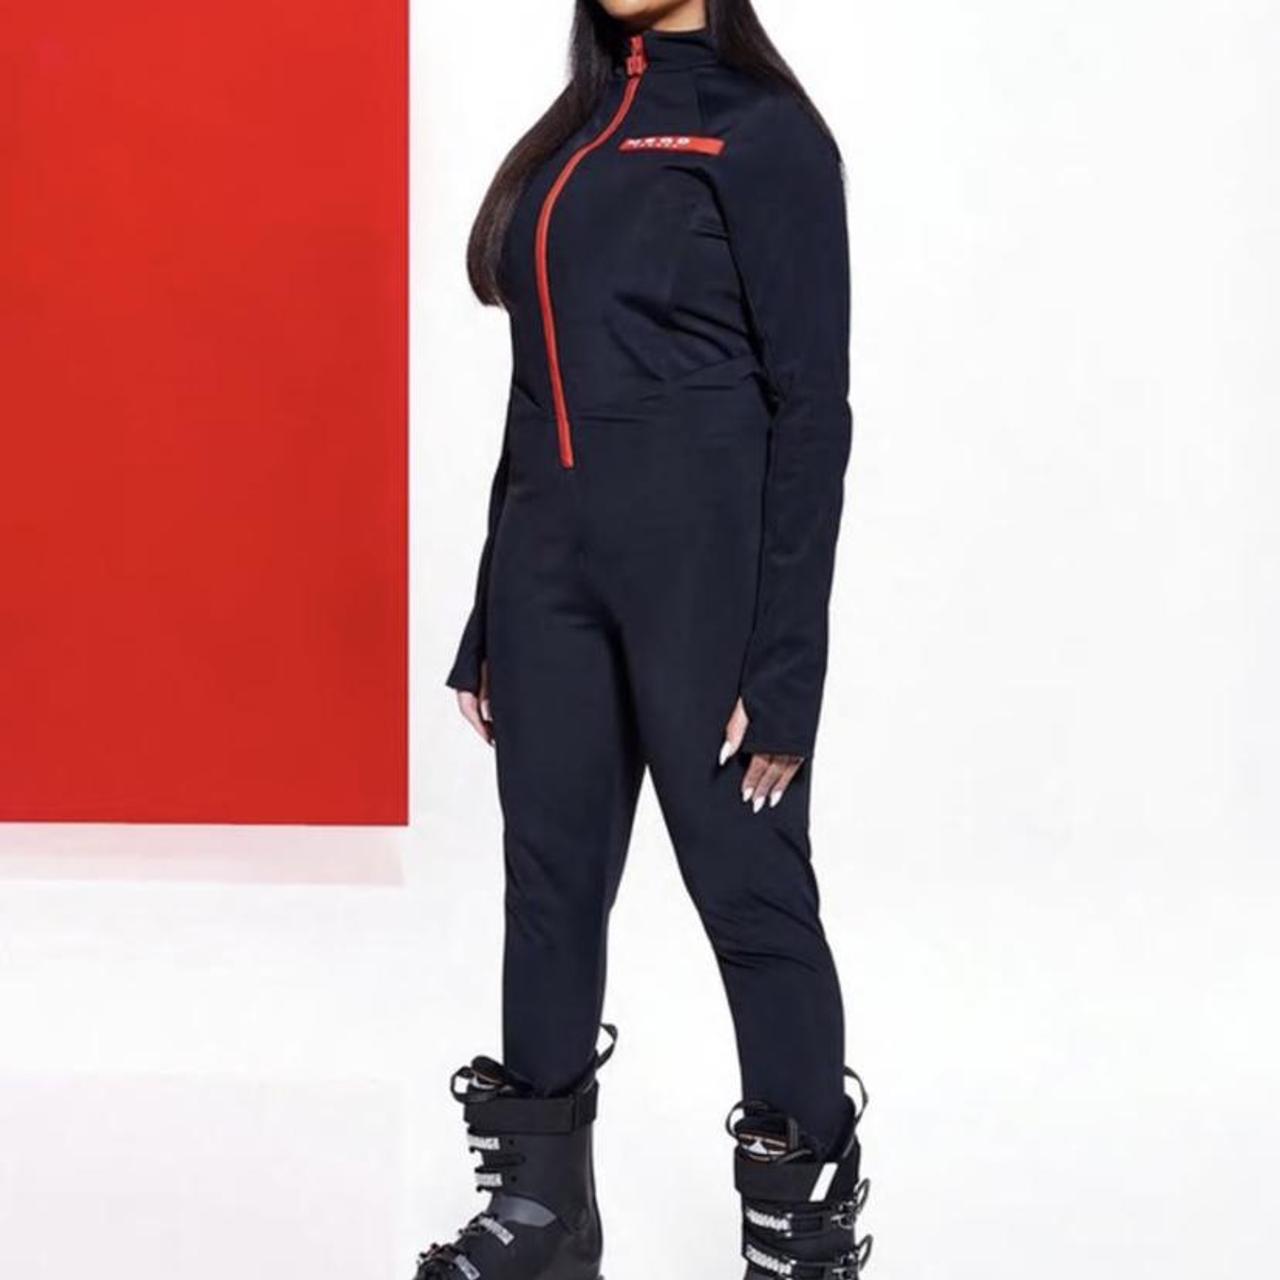 Ski suit - Missguided ski suit, very warm and